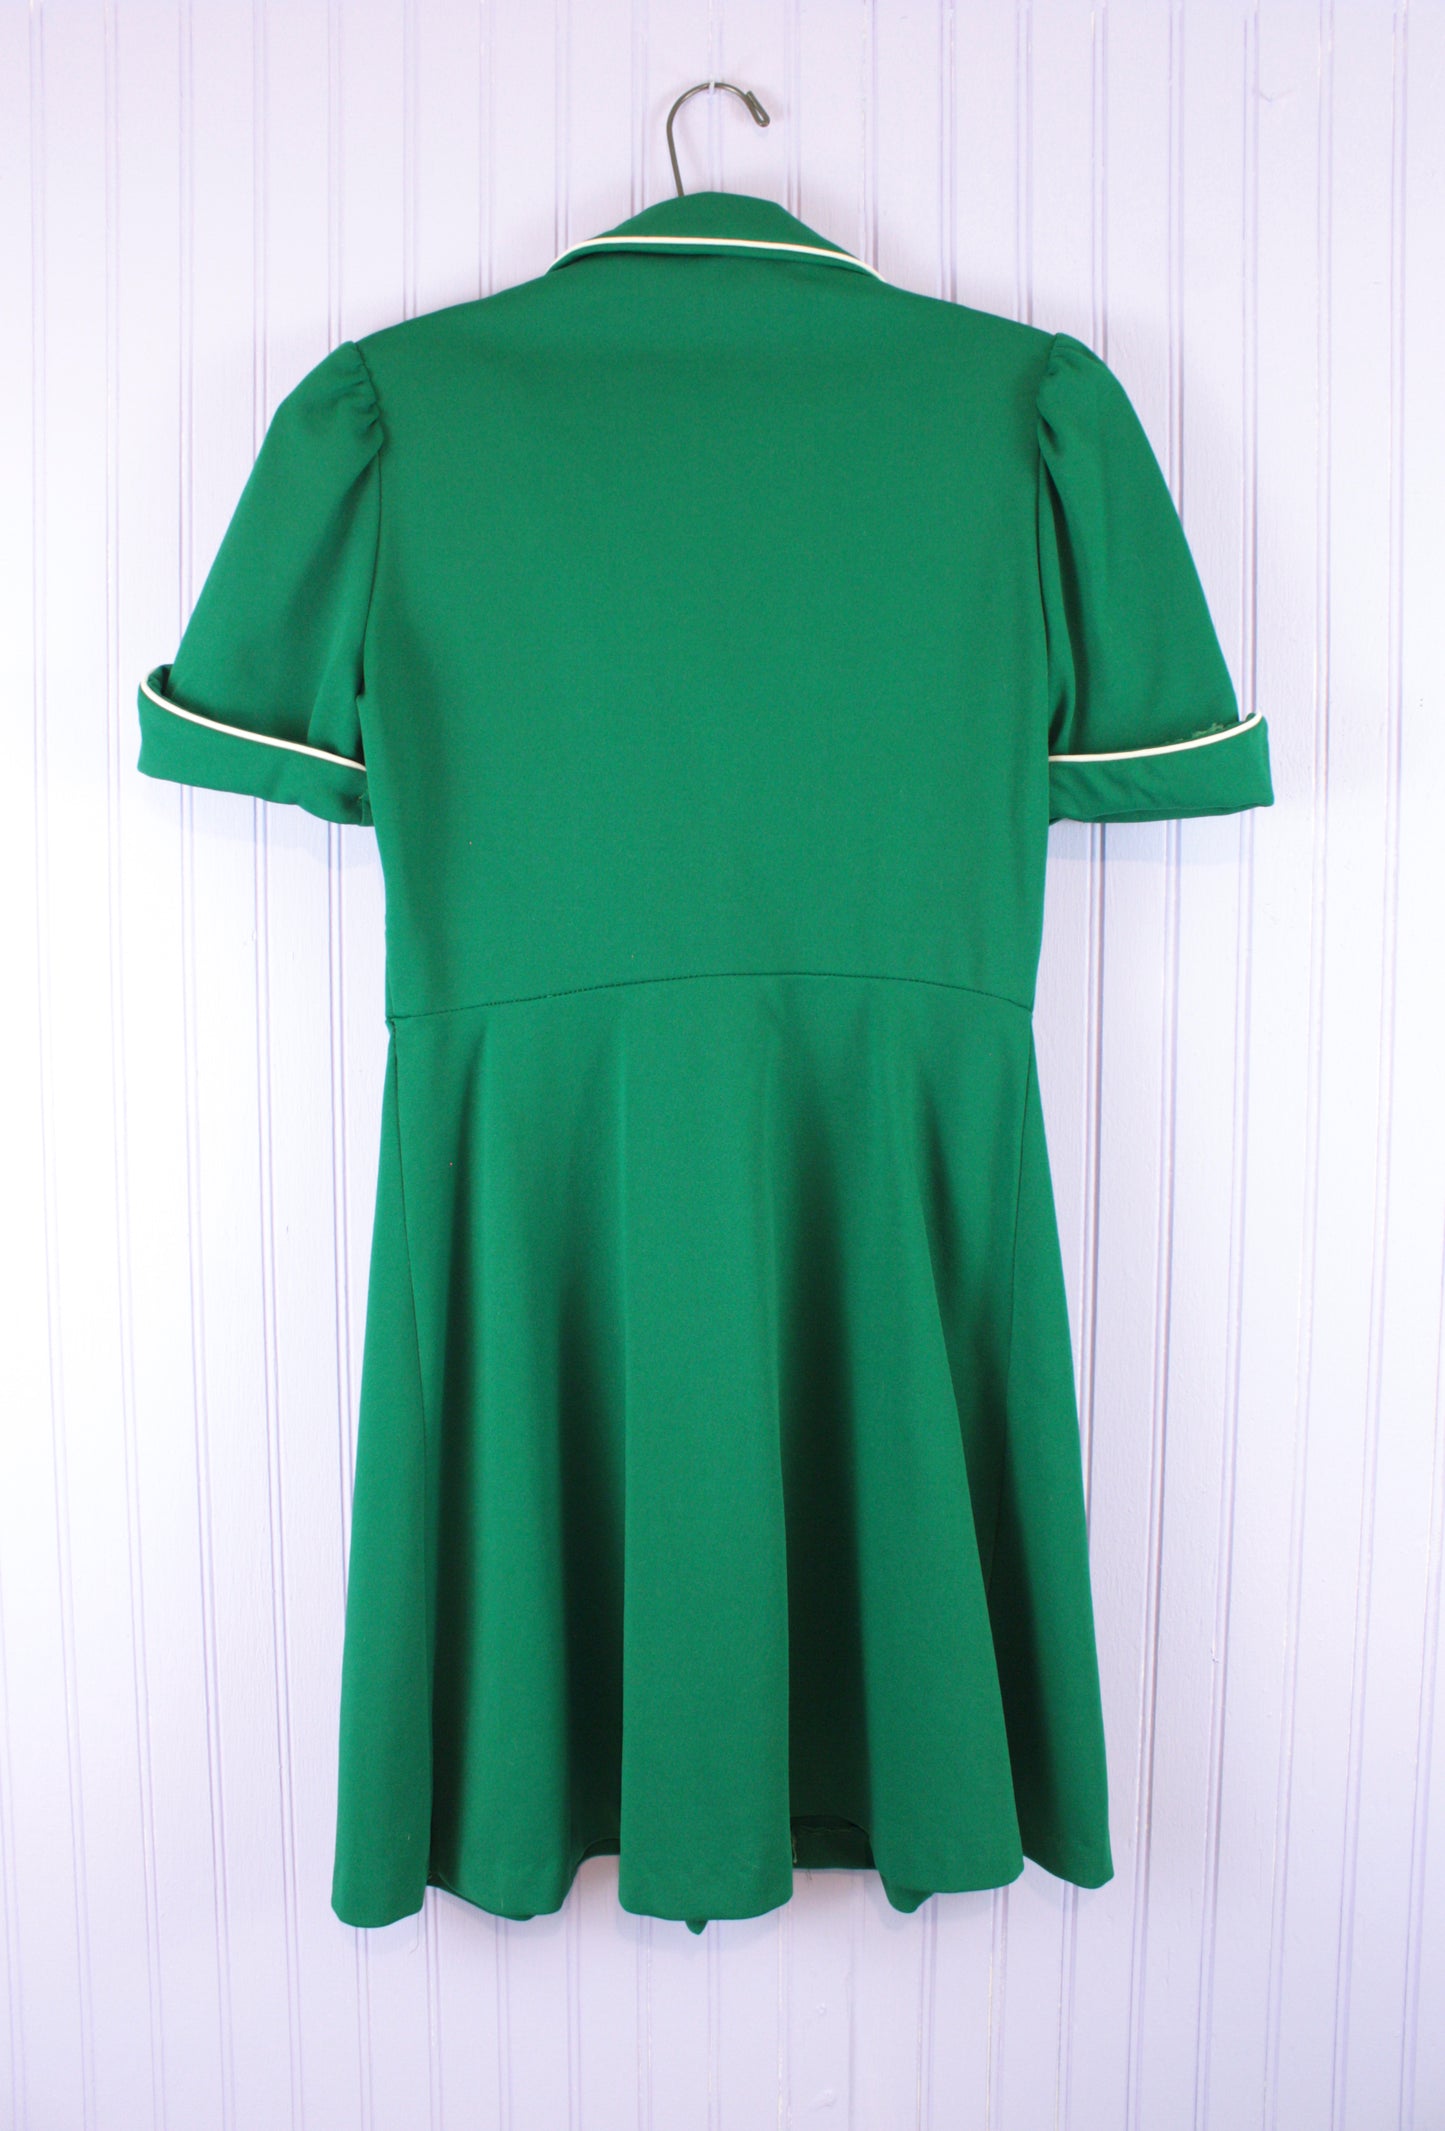 Vintage Green with White Piping Handmade Mini dress 2(S)